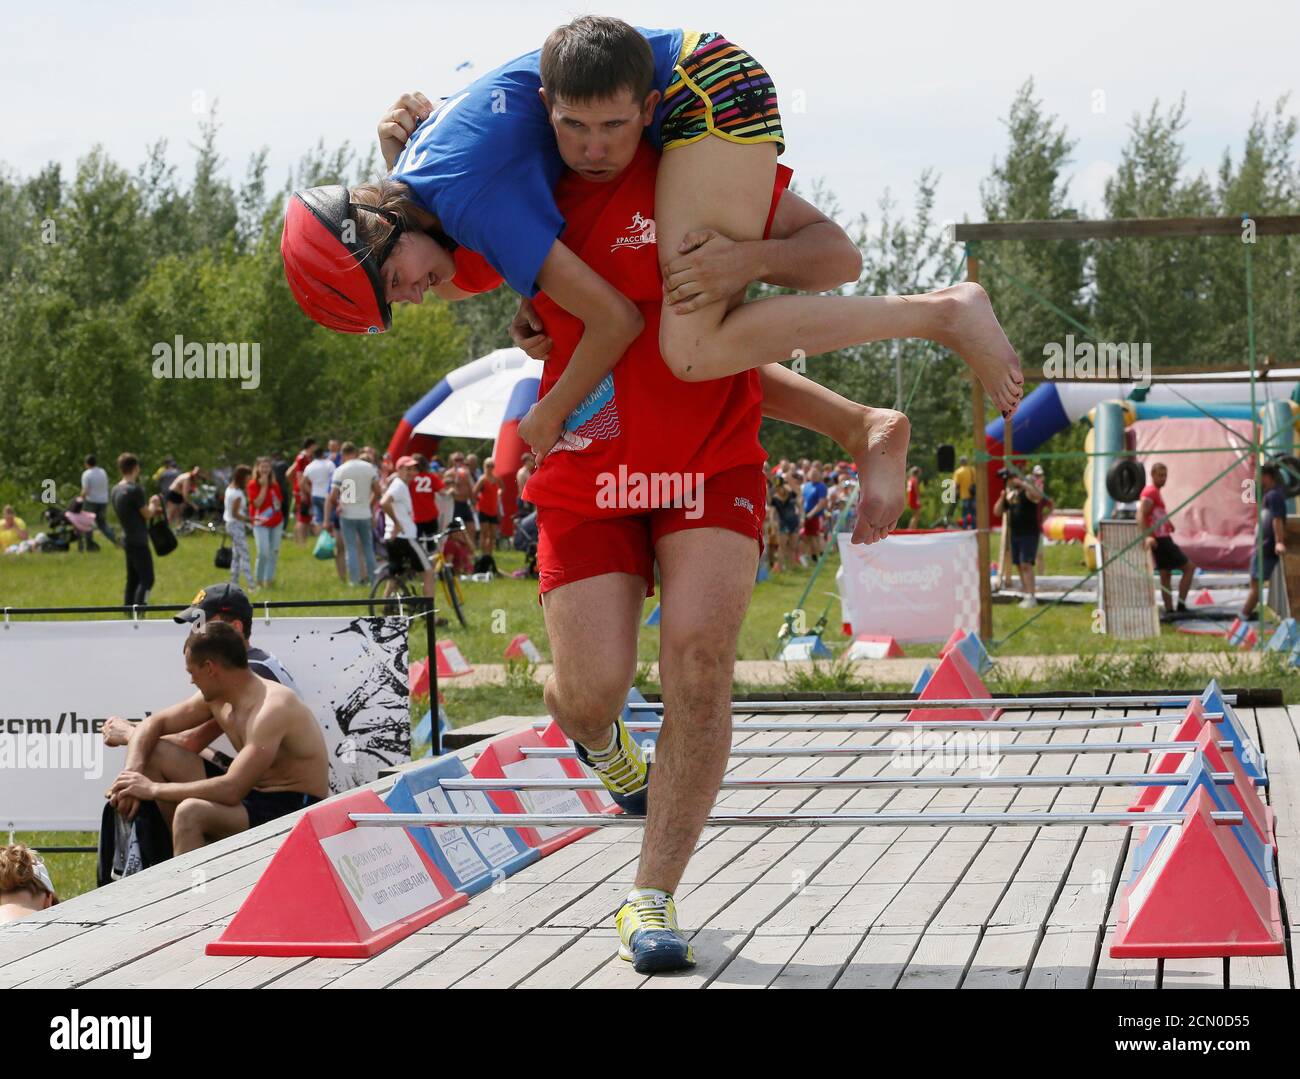 A man carries his wife over an obstacle while racing in the Wife Carrying competititon to mark the City Day in Krasnoyarsk, Siberia, Russia, June 10, 2017. Picture taken June 10, 2017. REUTERS/Ilya Naymushin Stock Photo